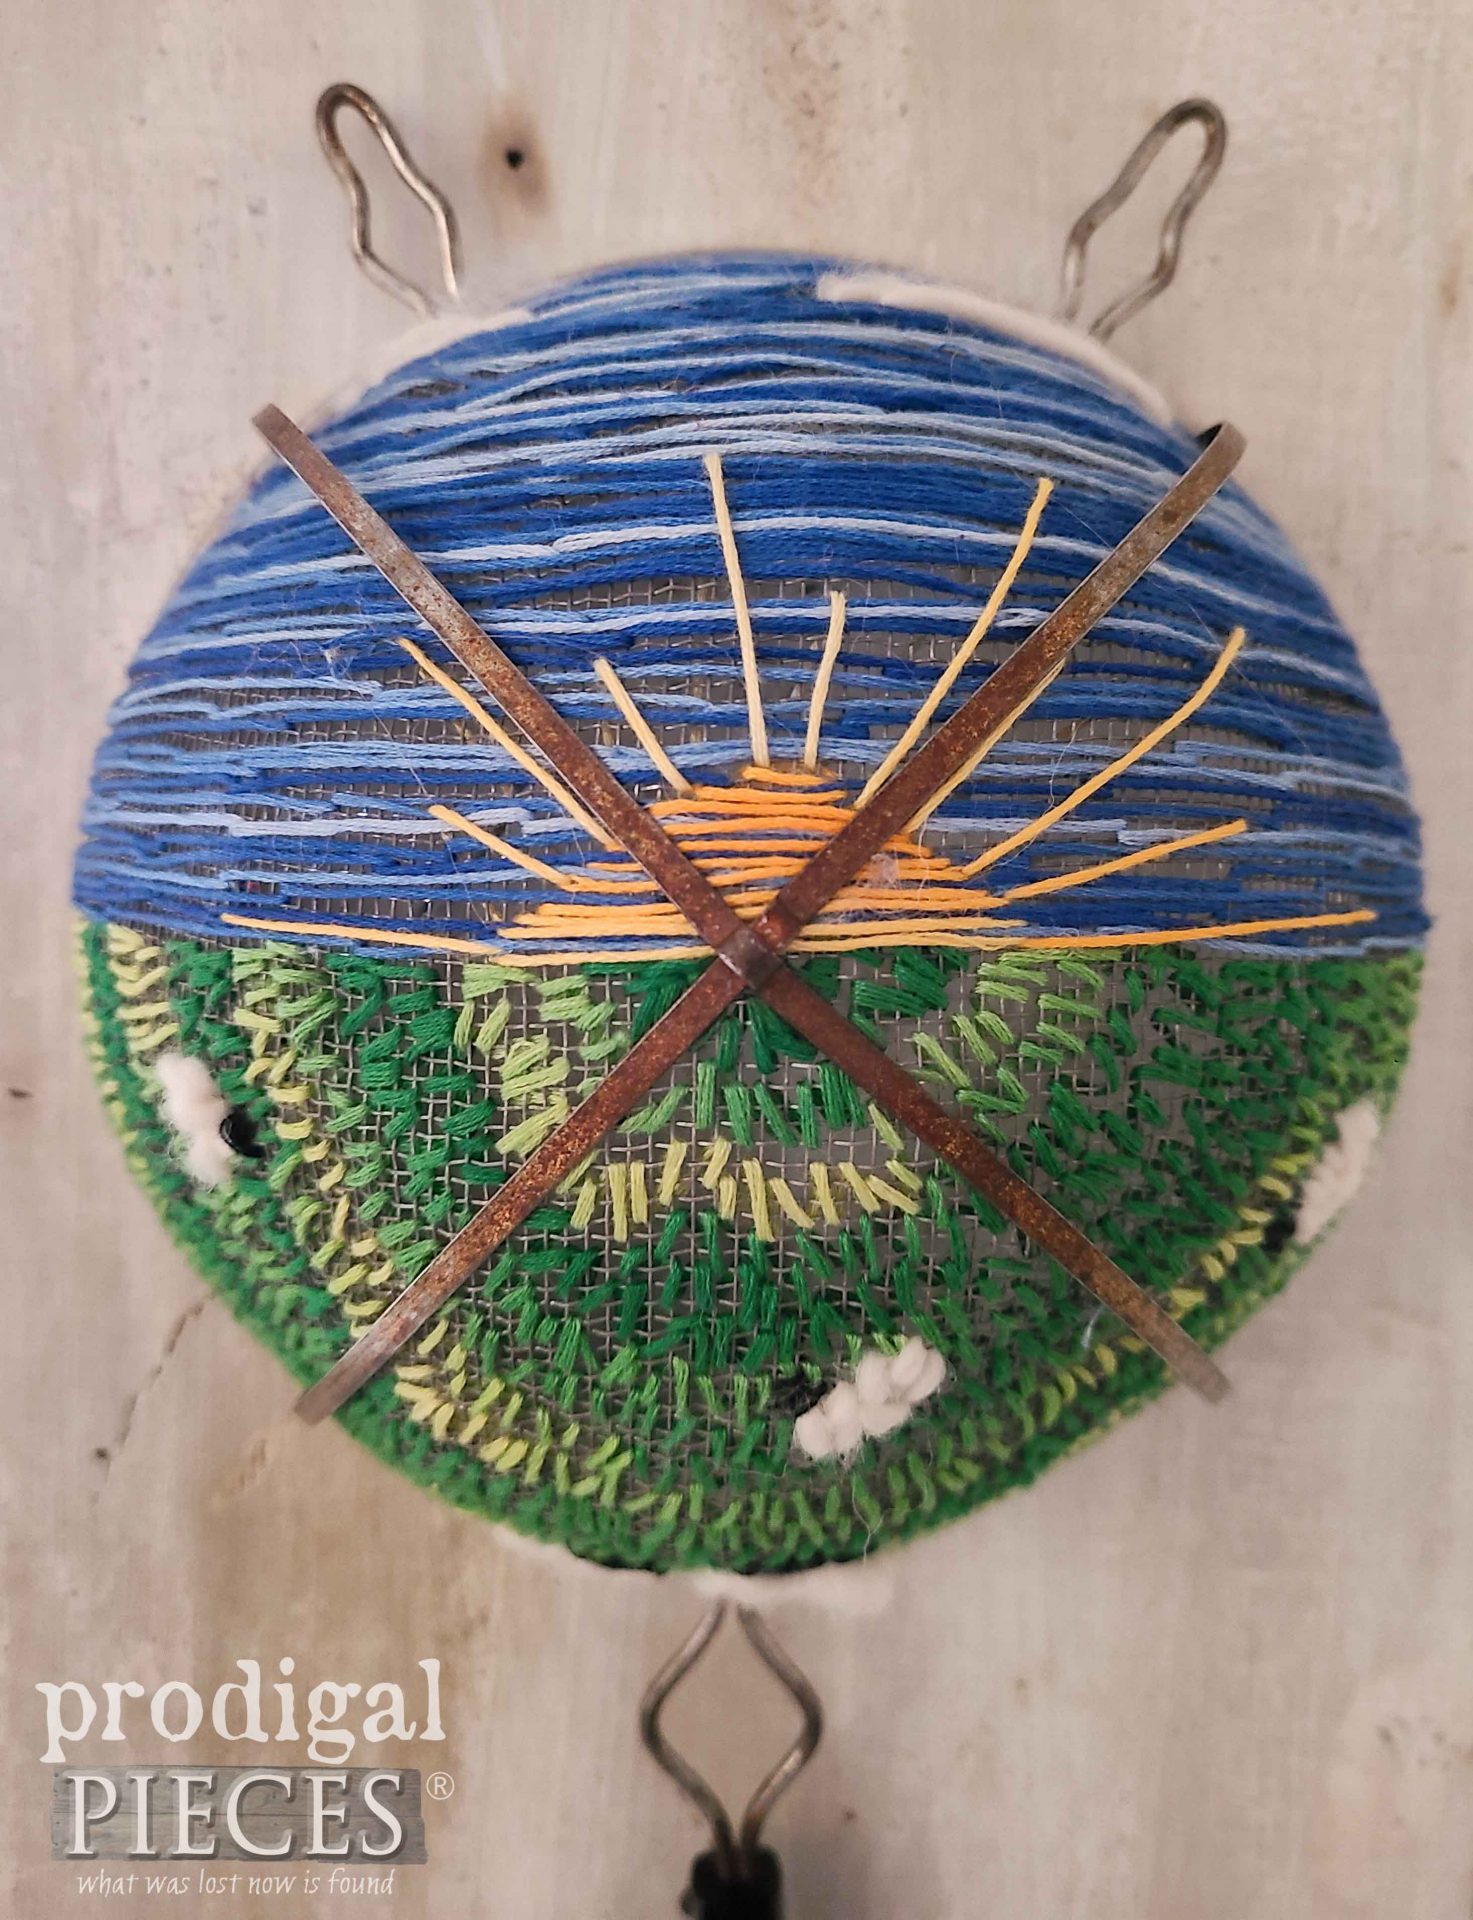 Sunrise and Sheep Embroidery Art on Vintage Strainer by Larissa of Prodigal Pieces | prodigalpieces.com #prodigalpieces #embroidery #art #upcycled #farmhouse